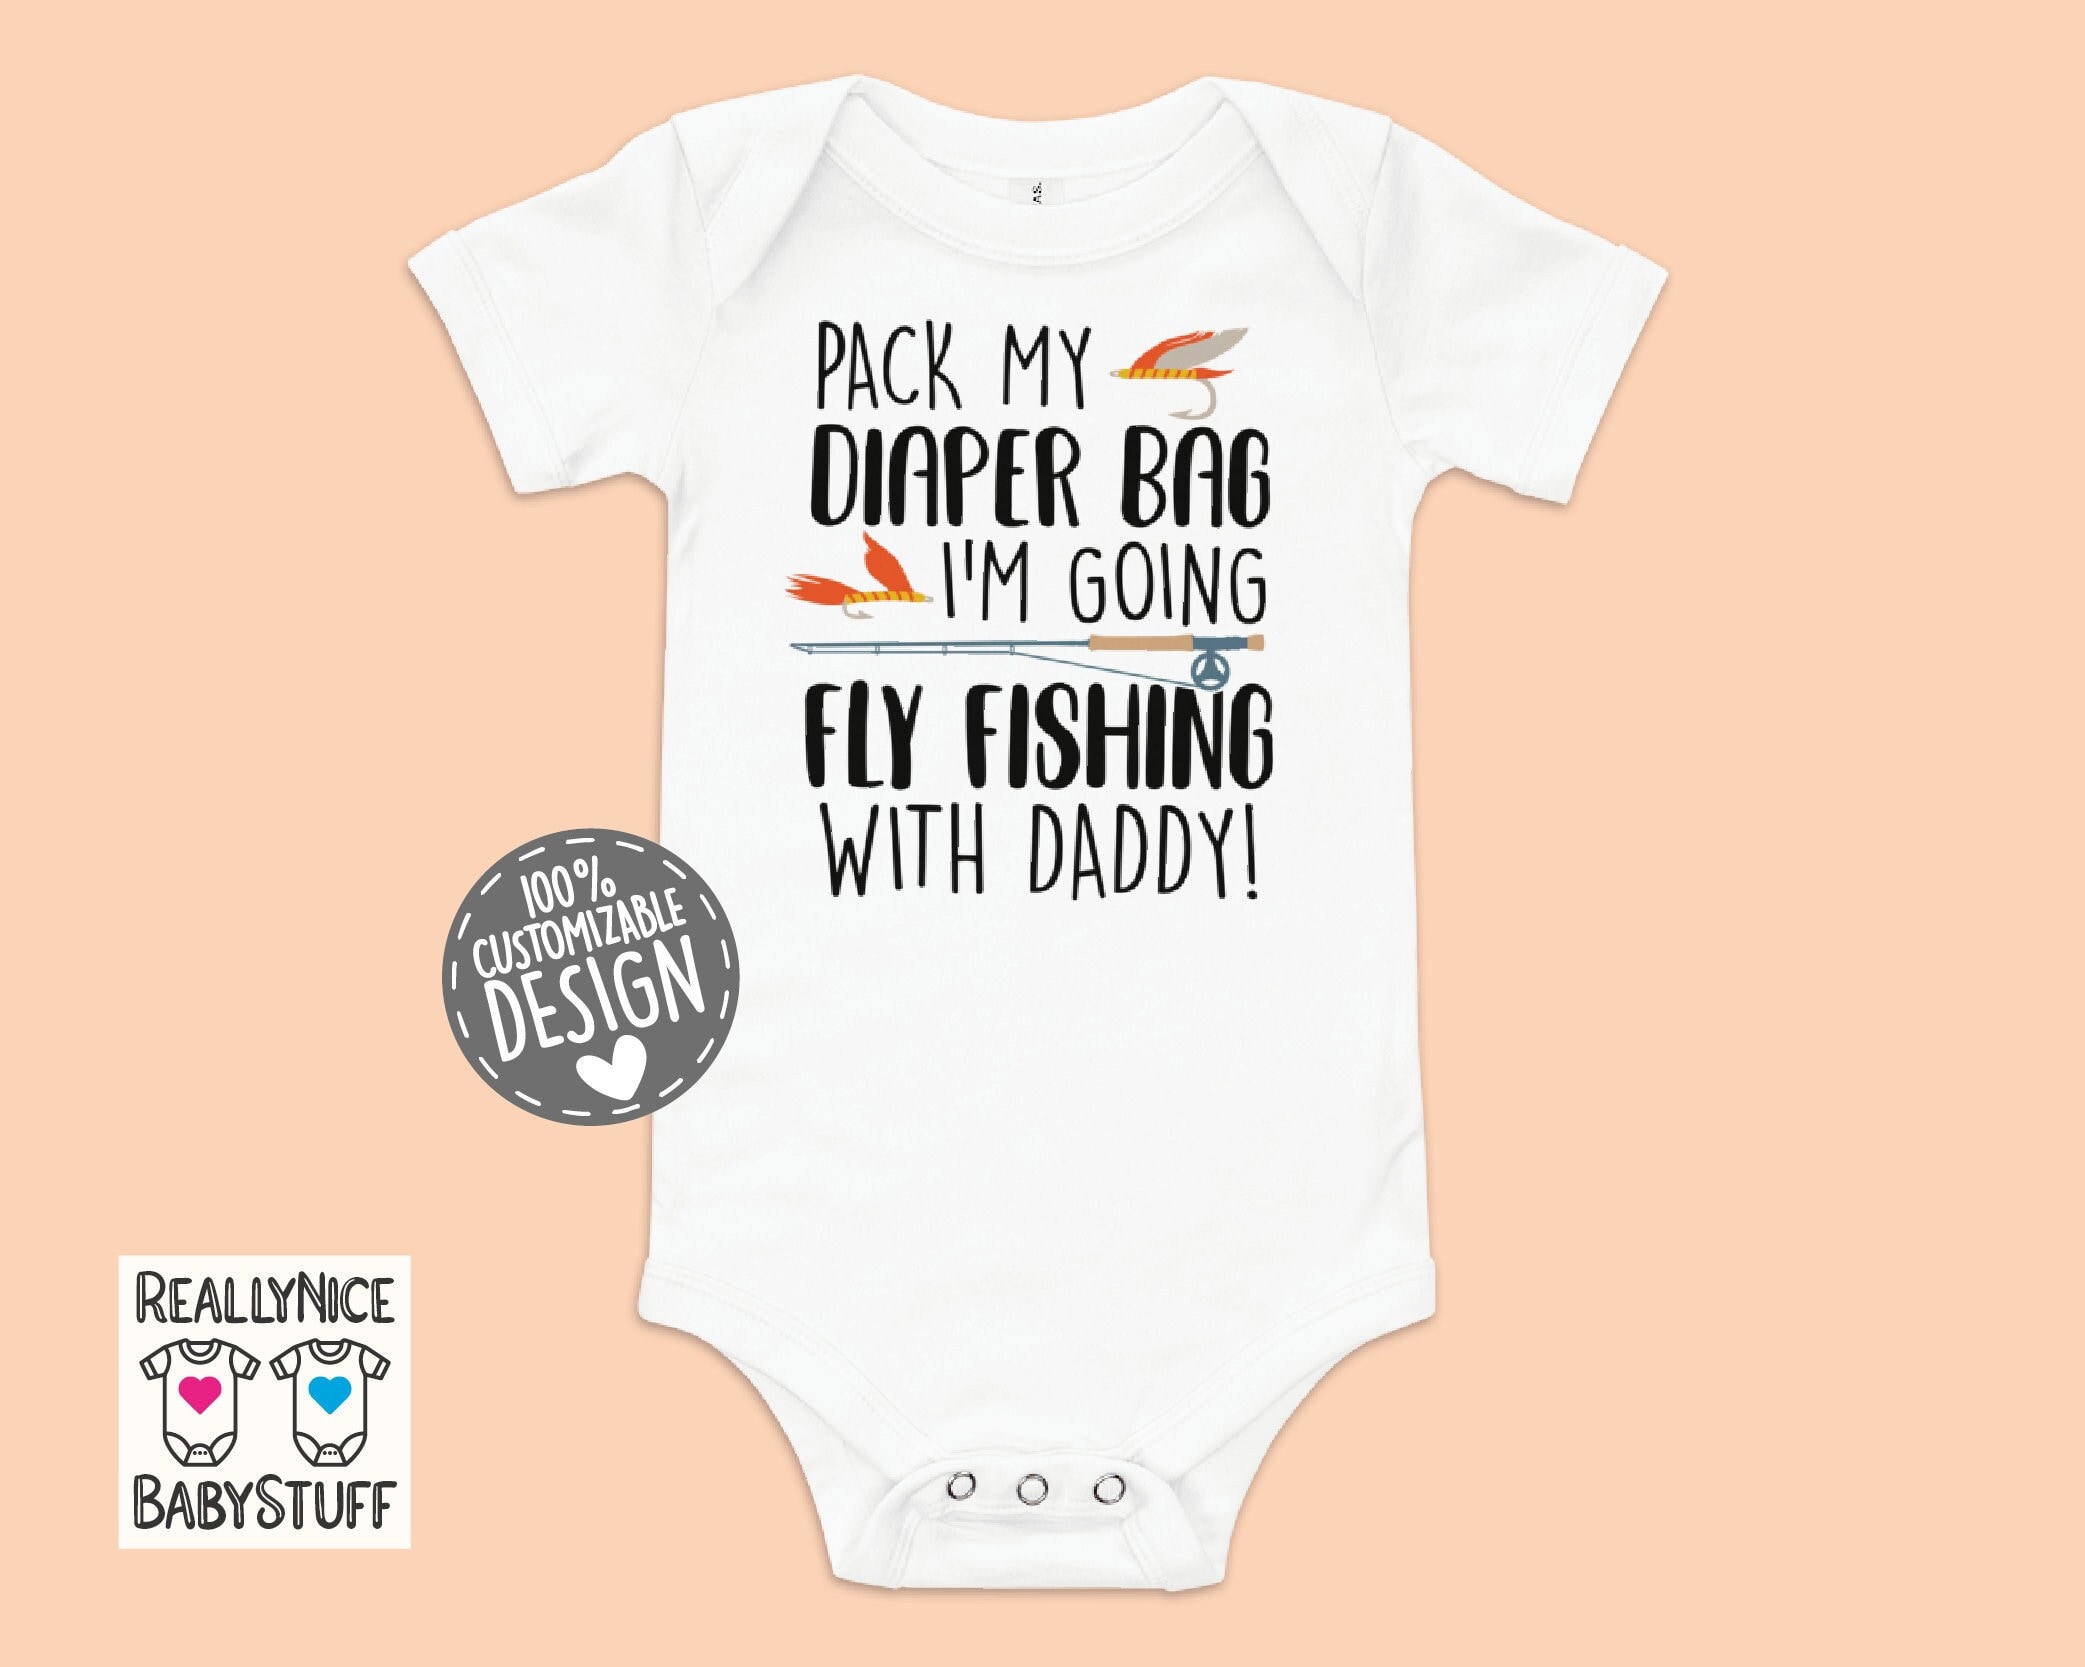 Fly Fishing Baby Bodysuit Pack Diaper Bag Fly Fishing With Daddy, Funny Fly  Fishing One Piece, Cute Fly Fisher Dad Bodysuit Gift Idea 